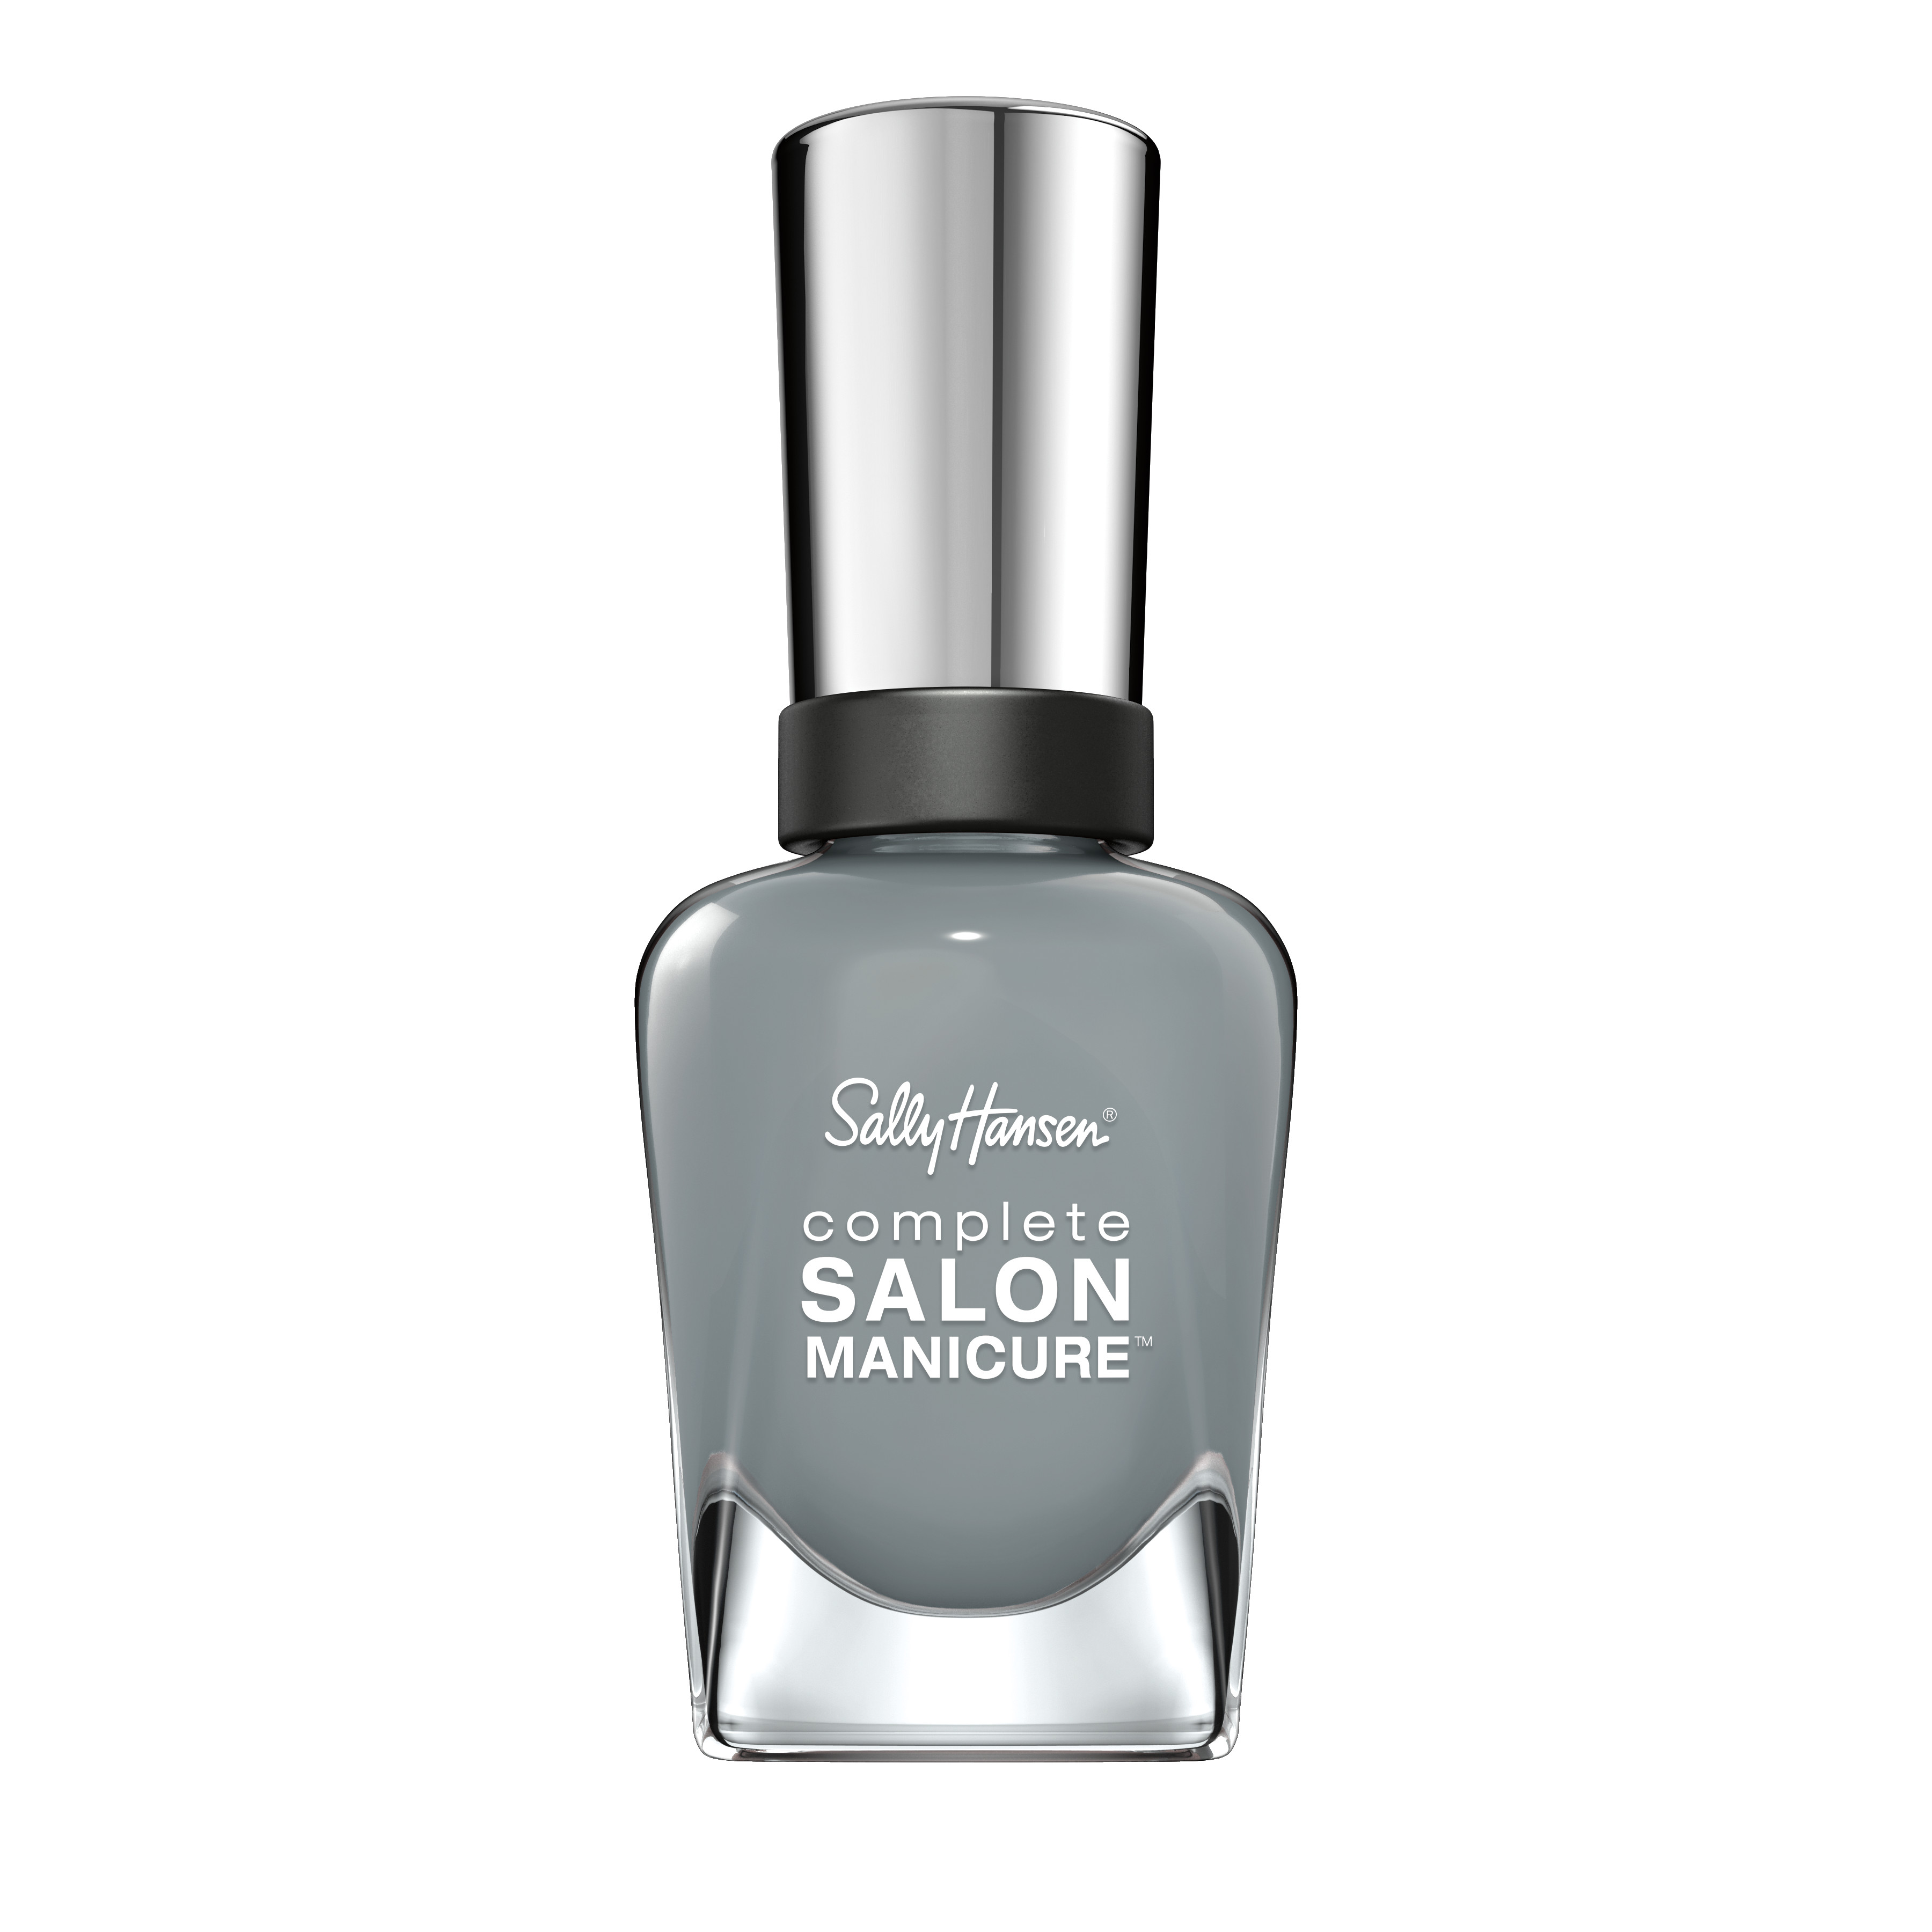 Sally Hansen Complete Salon Manicure Nail Color, Grey-Dreaming - image 1 of 2